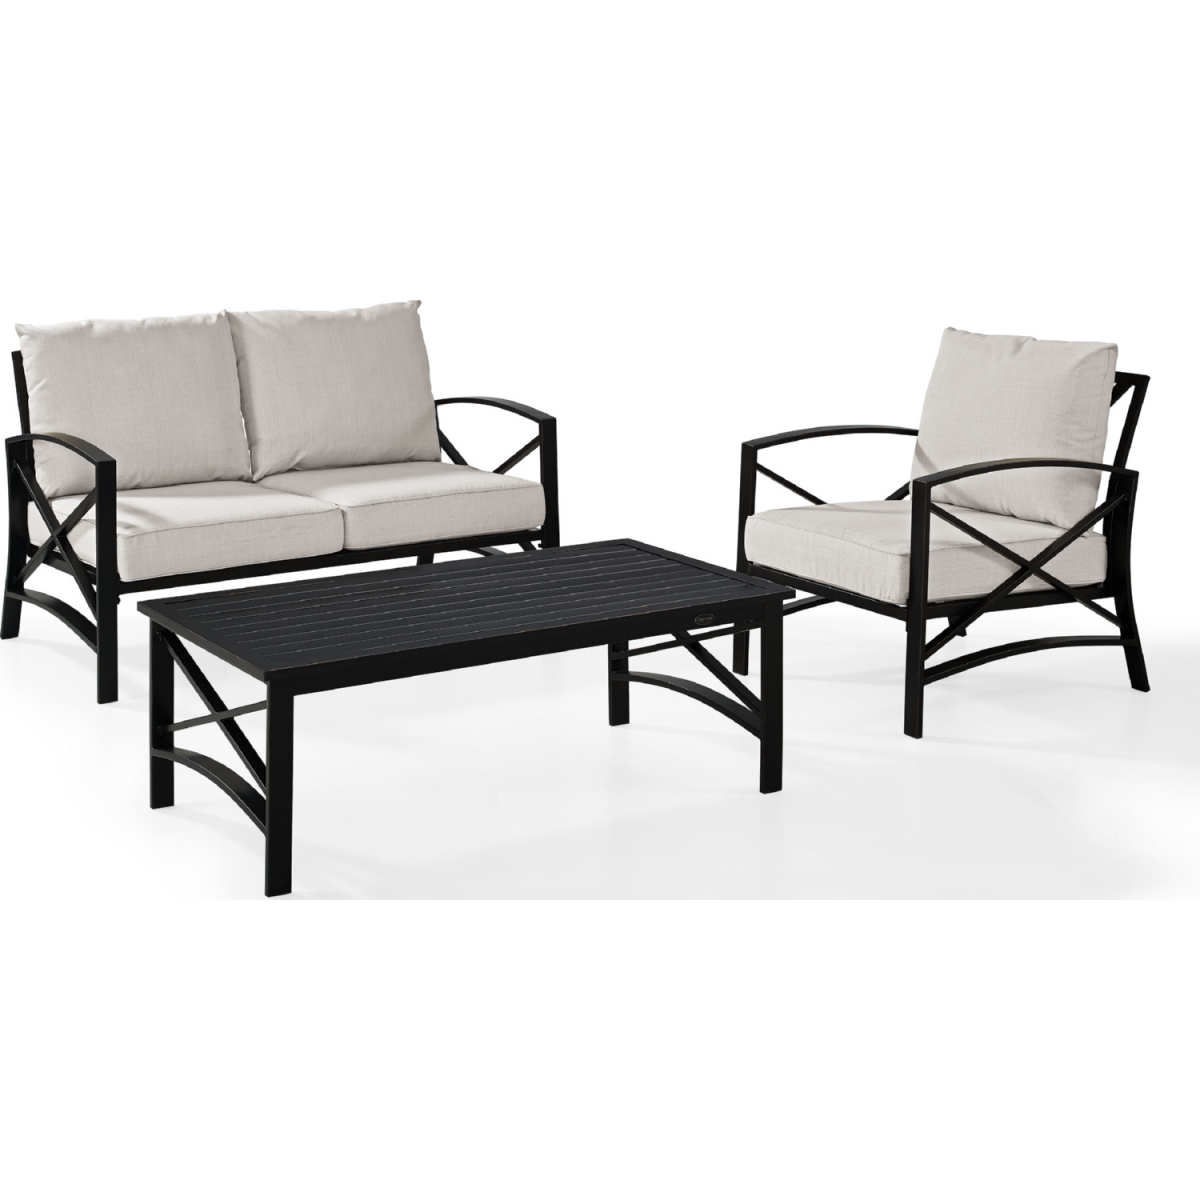 Ko60014bz-ol 3 Piece Kaplan Outdoor Seating Set With Oatmeal Cushion - Loveseat, Chair, Coffee Table